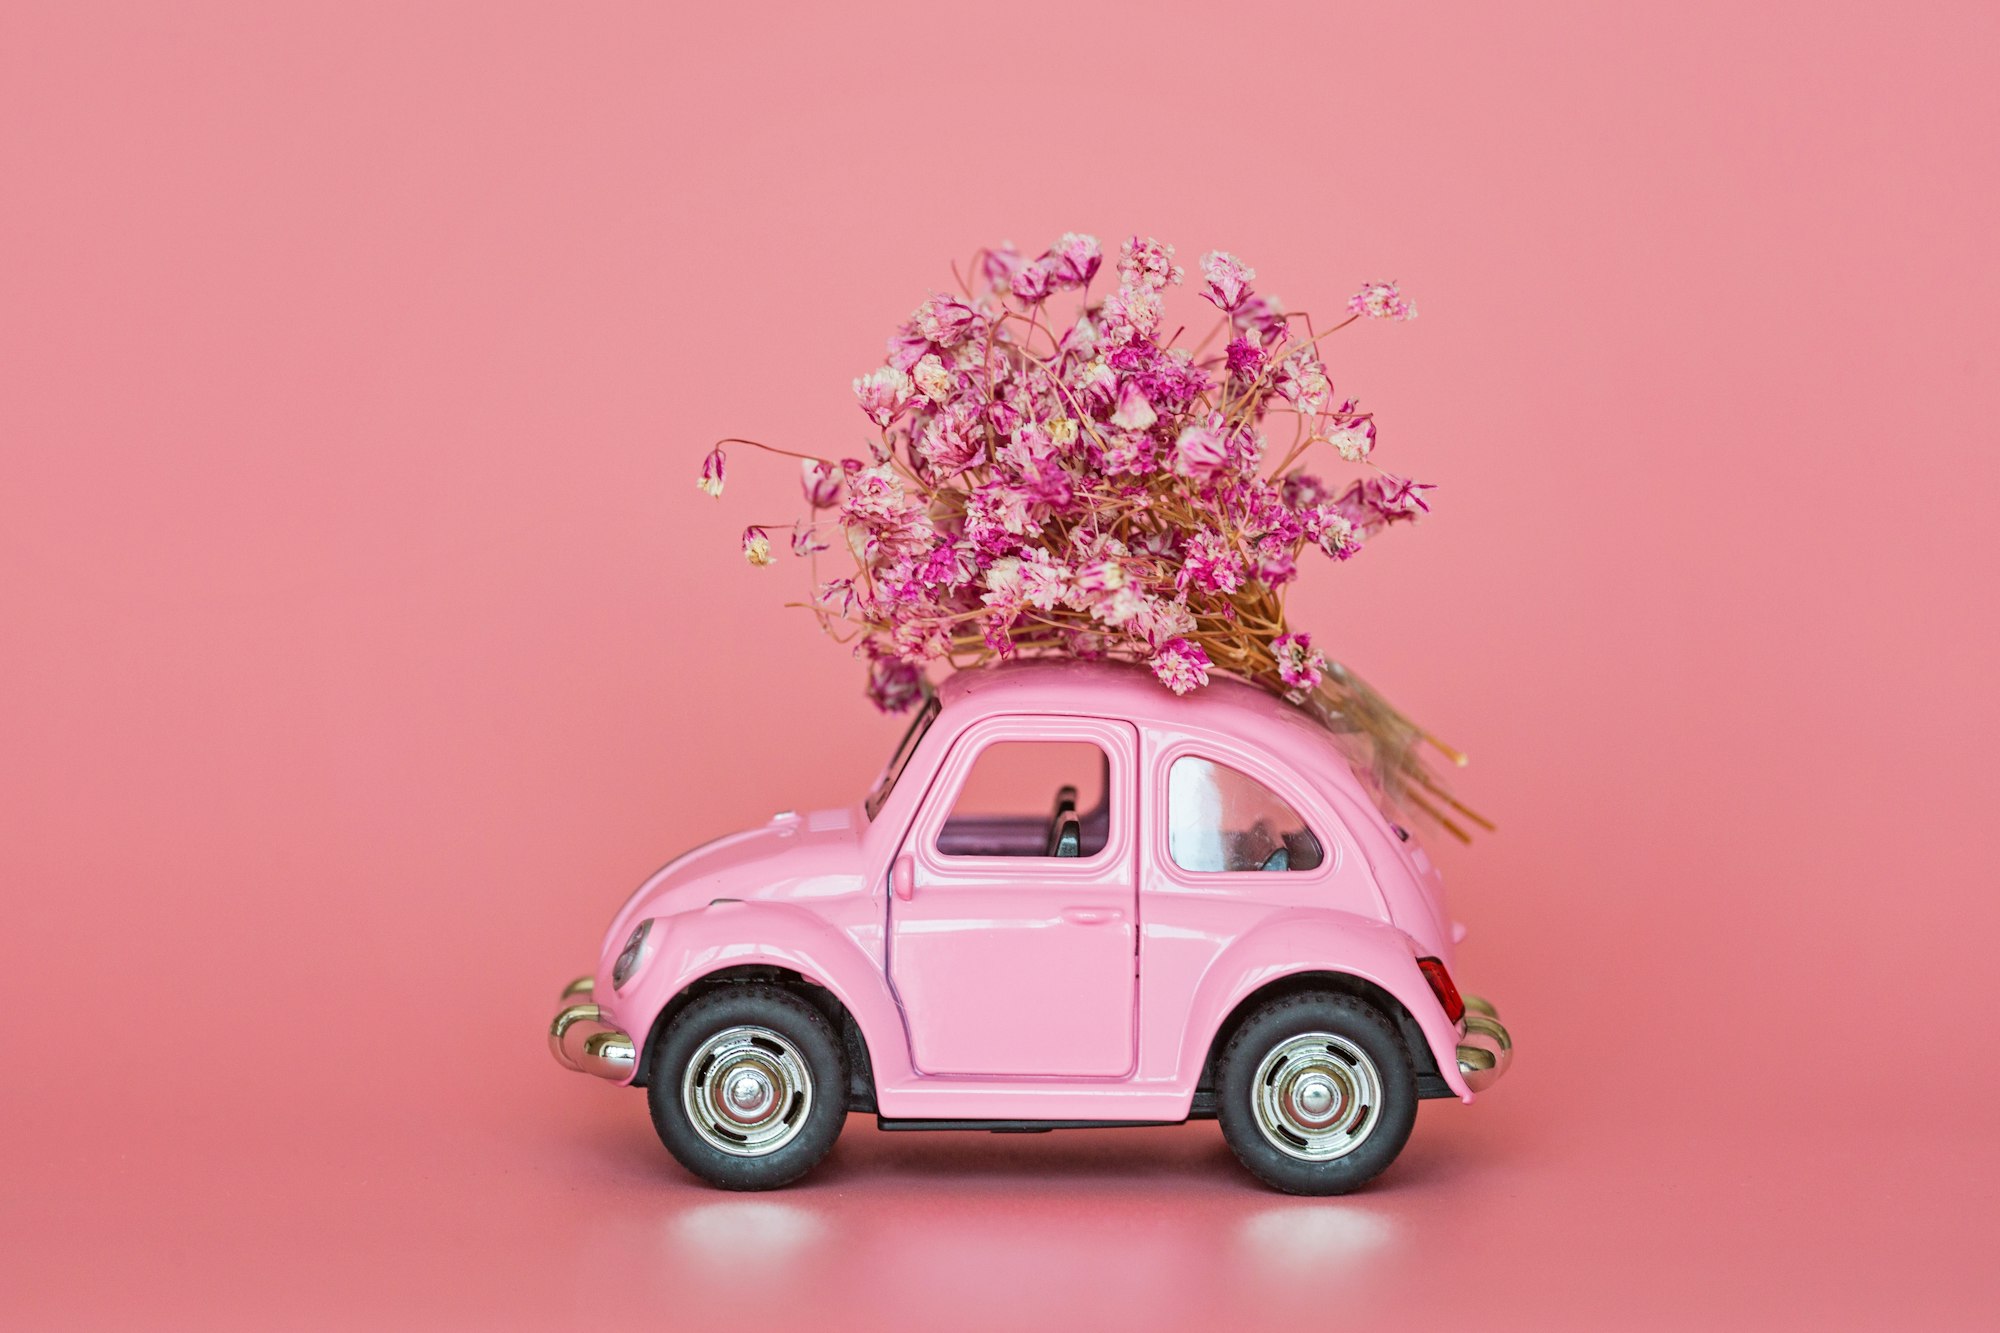 Mockup for delivery services with toy car and bouquet of flowers on roof on pink background